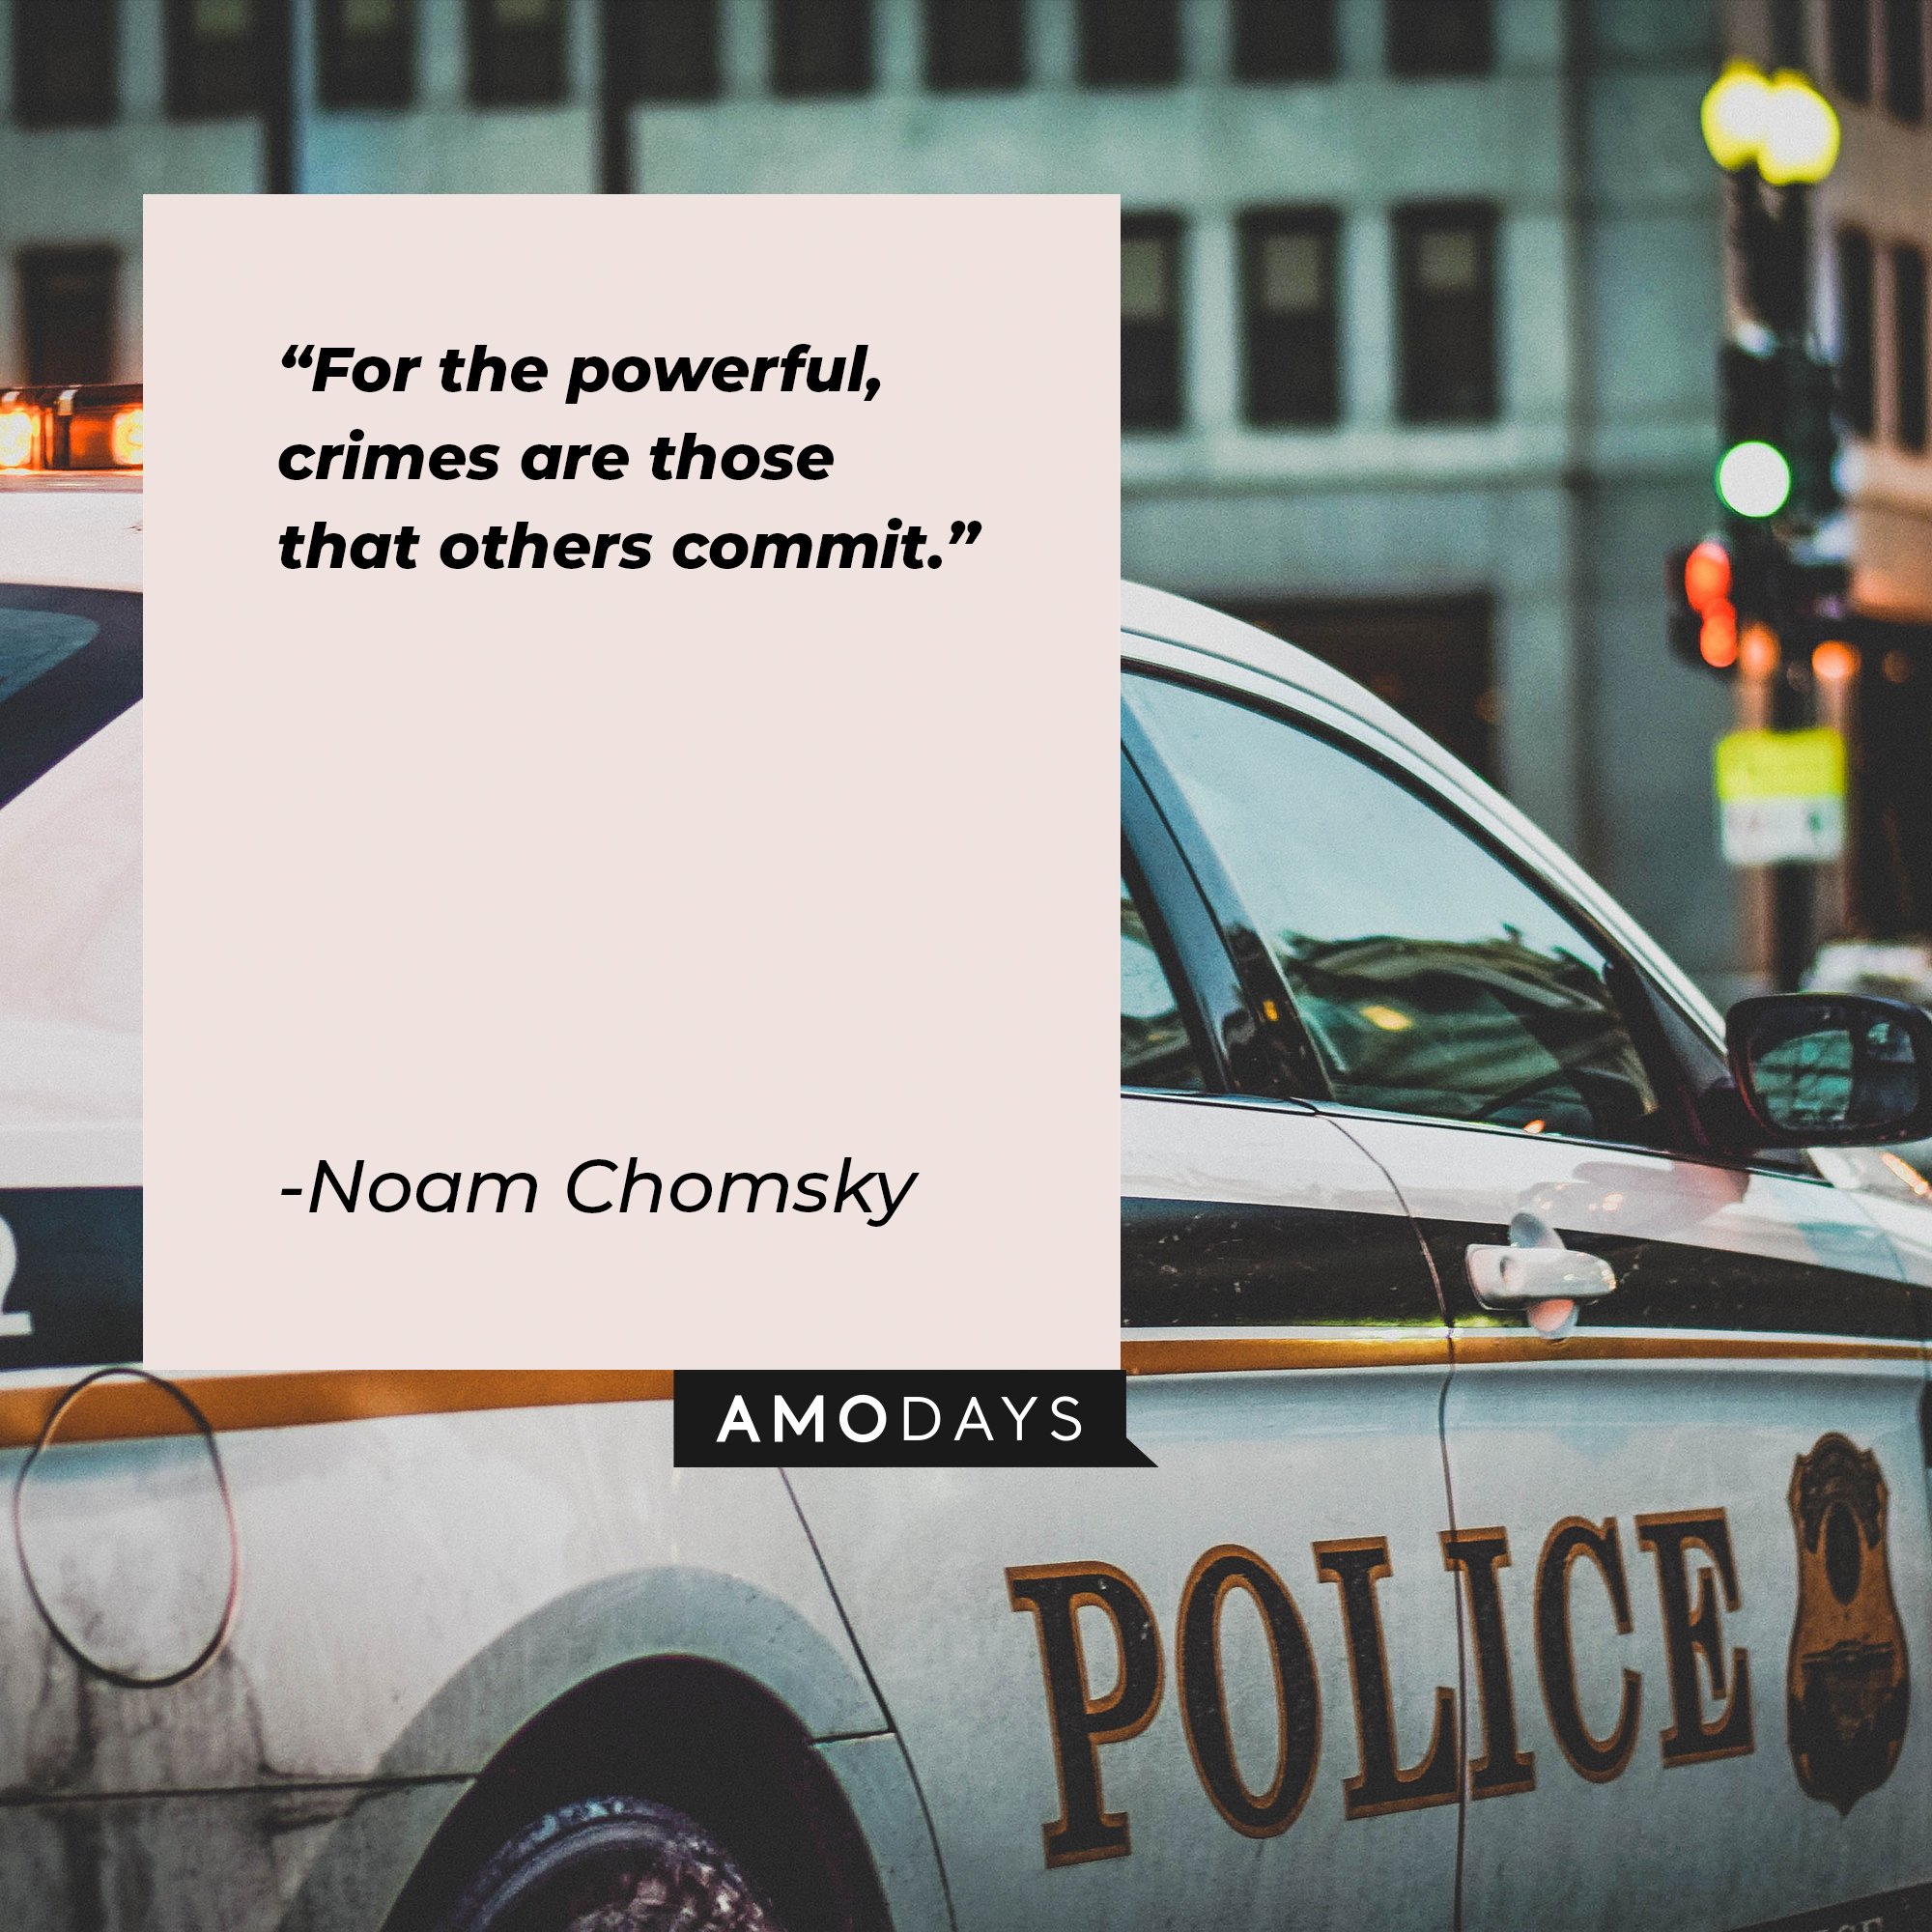 Noam Chomsky’s quote: "For the powerful, crimes are those that others commit." | Image: AmoDays  